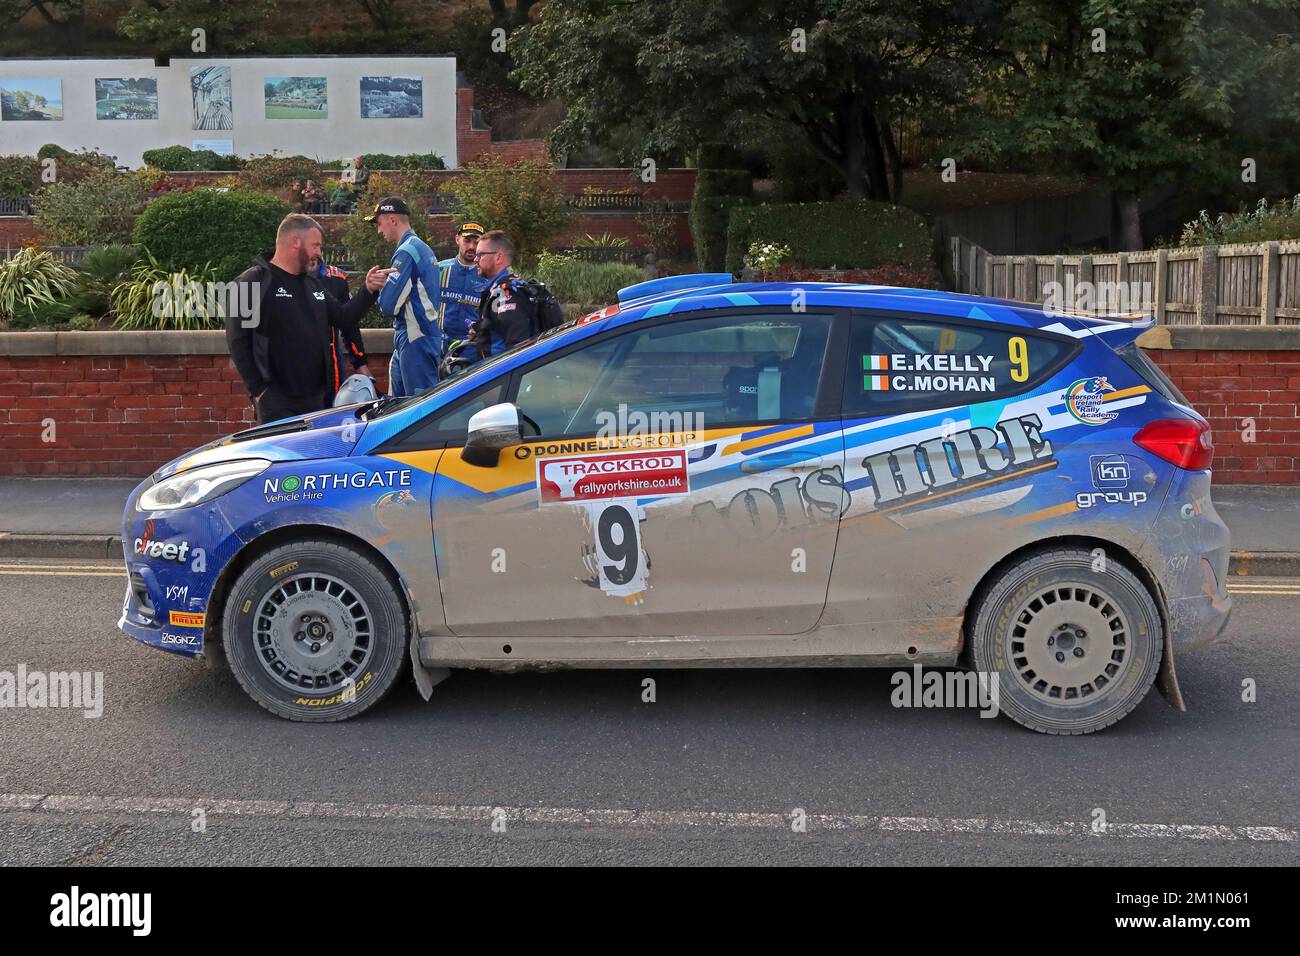 Car 9 - Eamonn Kelly Drumbarron - Conor Mohan Ballinode, Stage at Filey 24th Sep 2022, Yorkshire Trackrod Motor Club Rally, England, UK Stock Photo